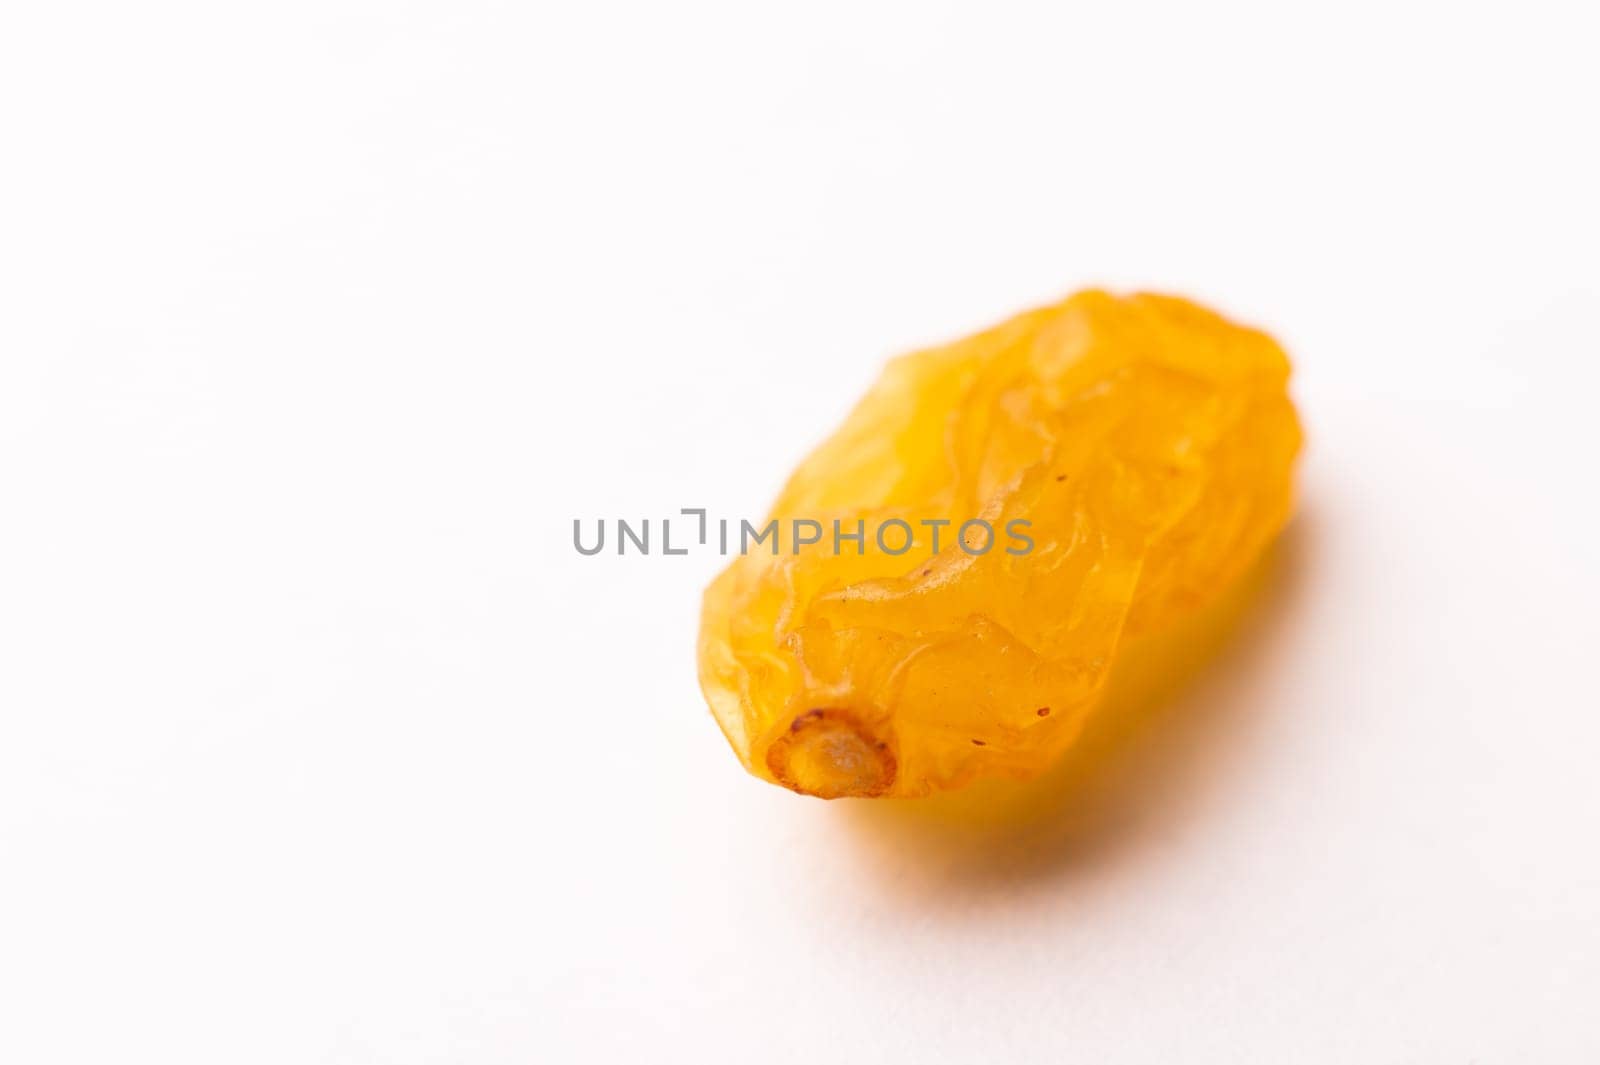 macro photograph of one raisin on a white background, side view.